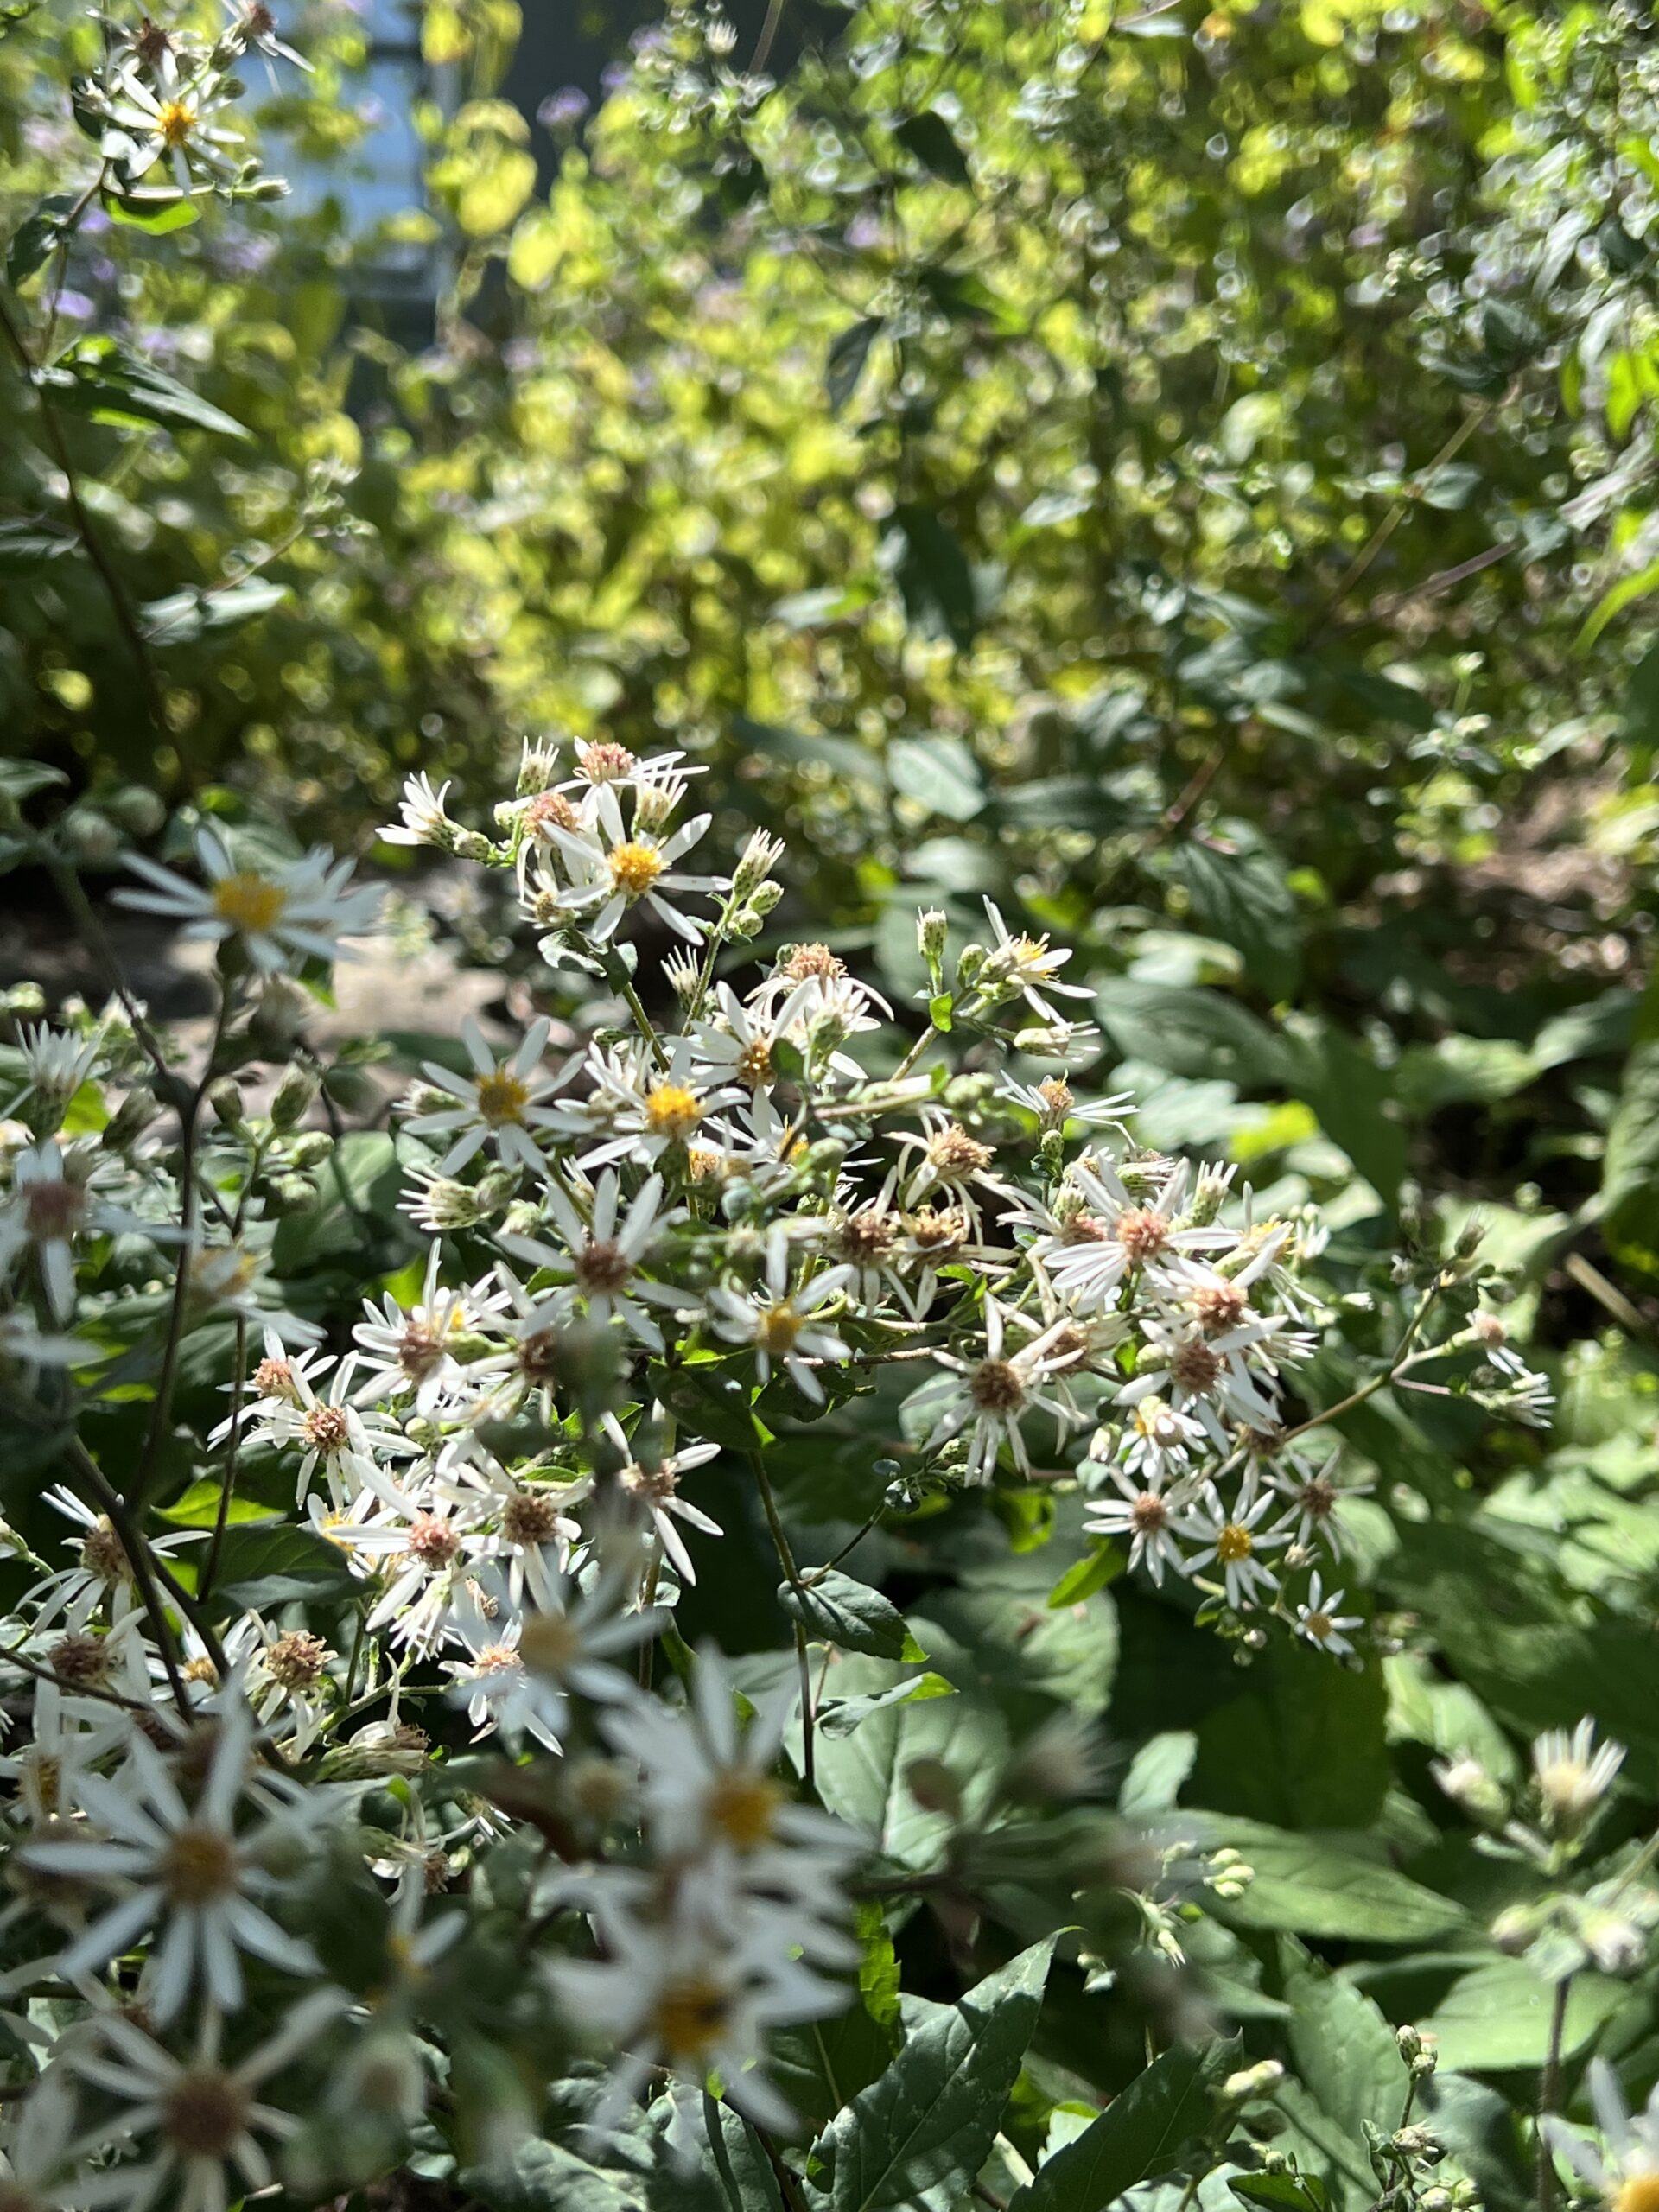 A dense cluster of white wood aster flowers rest in the evening sun